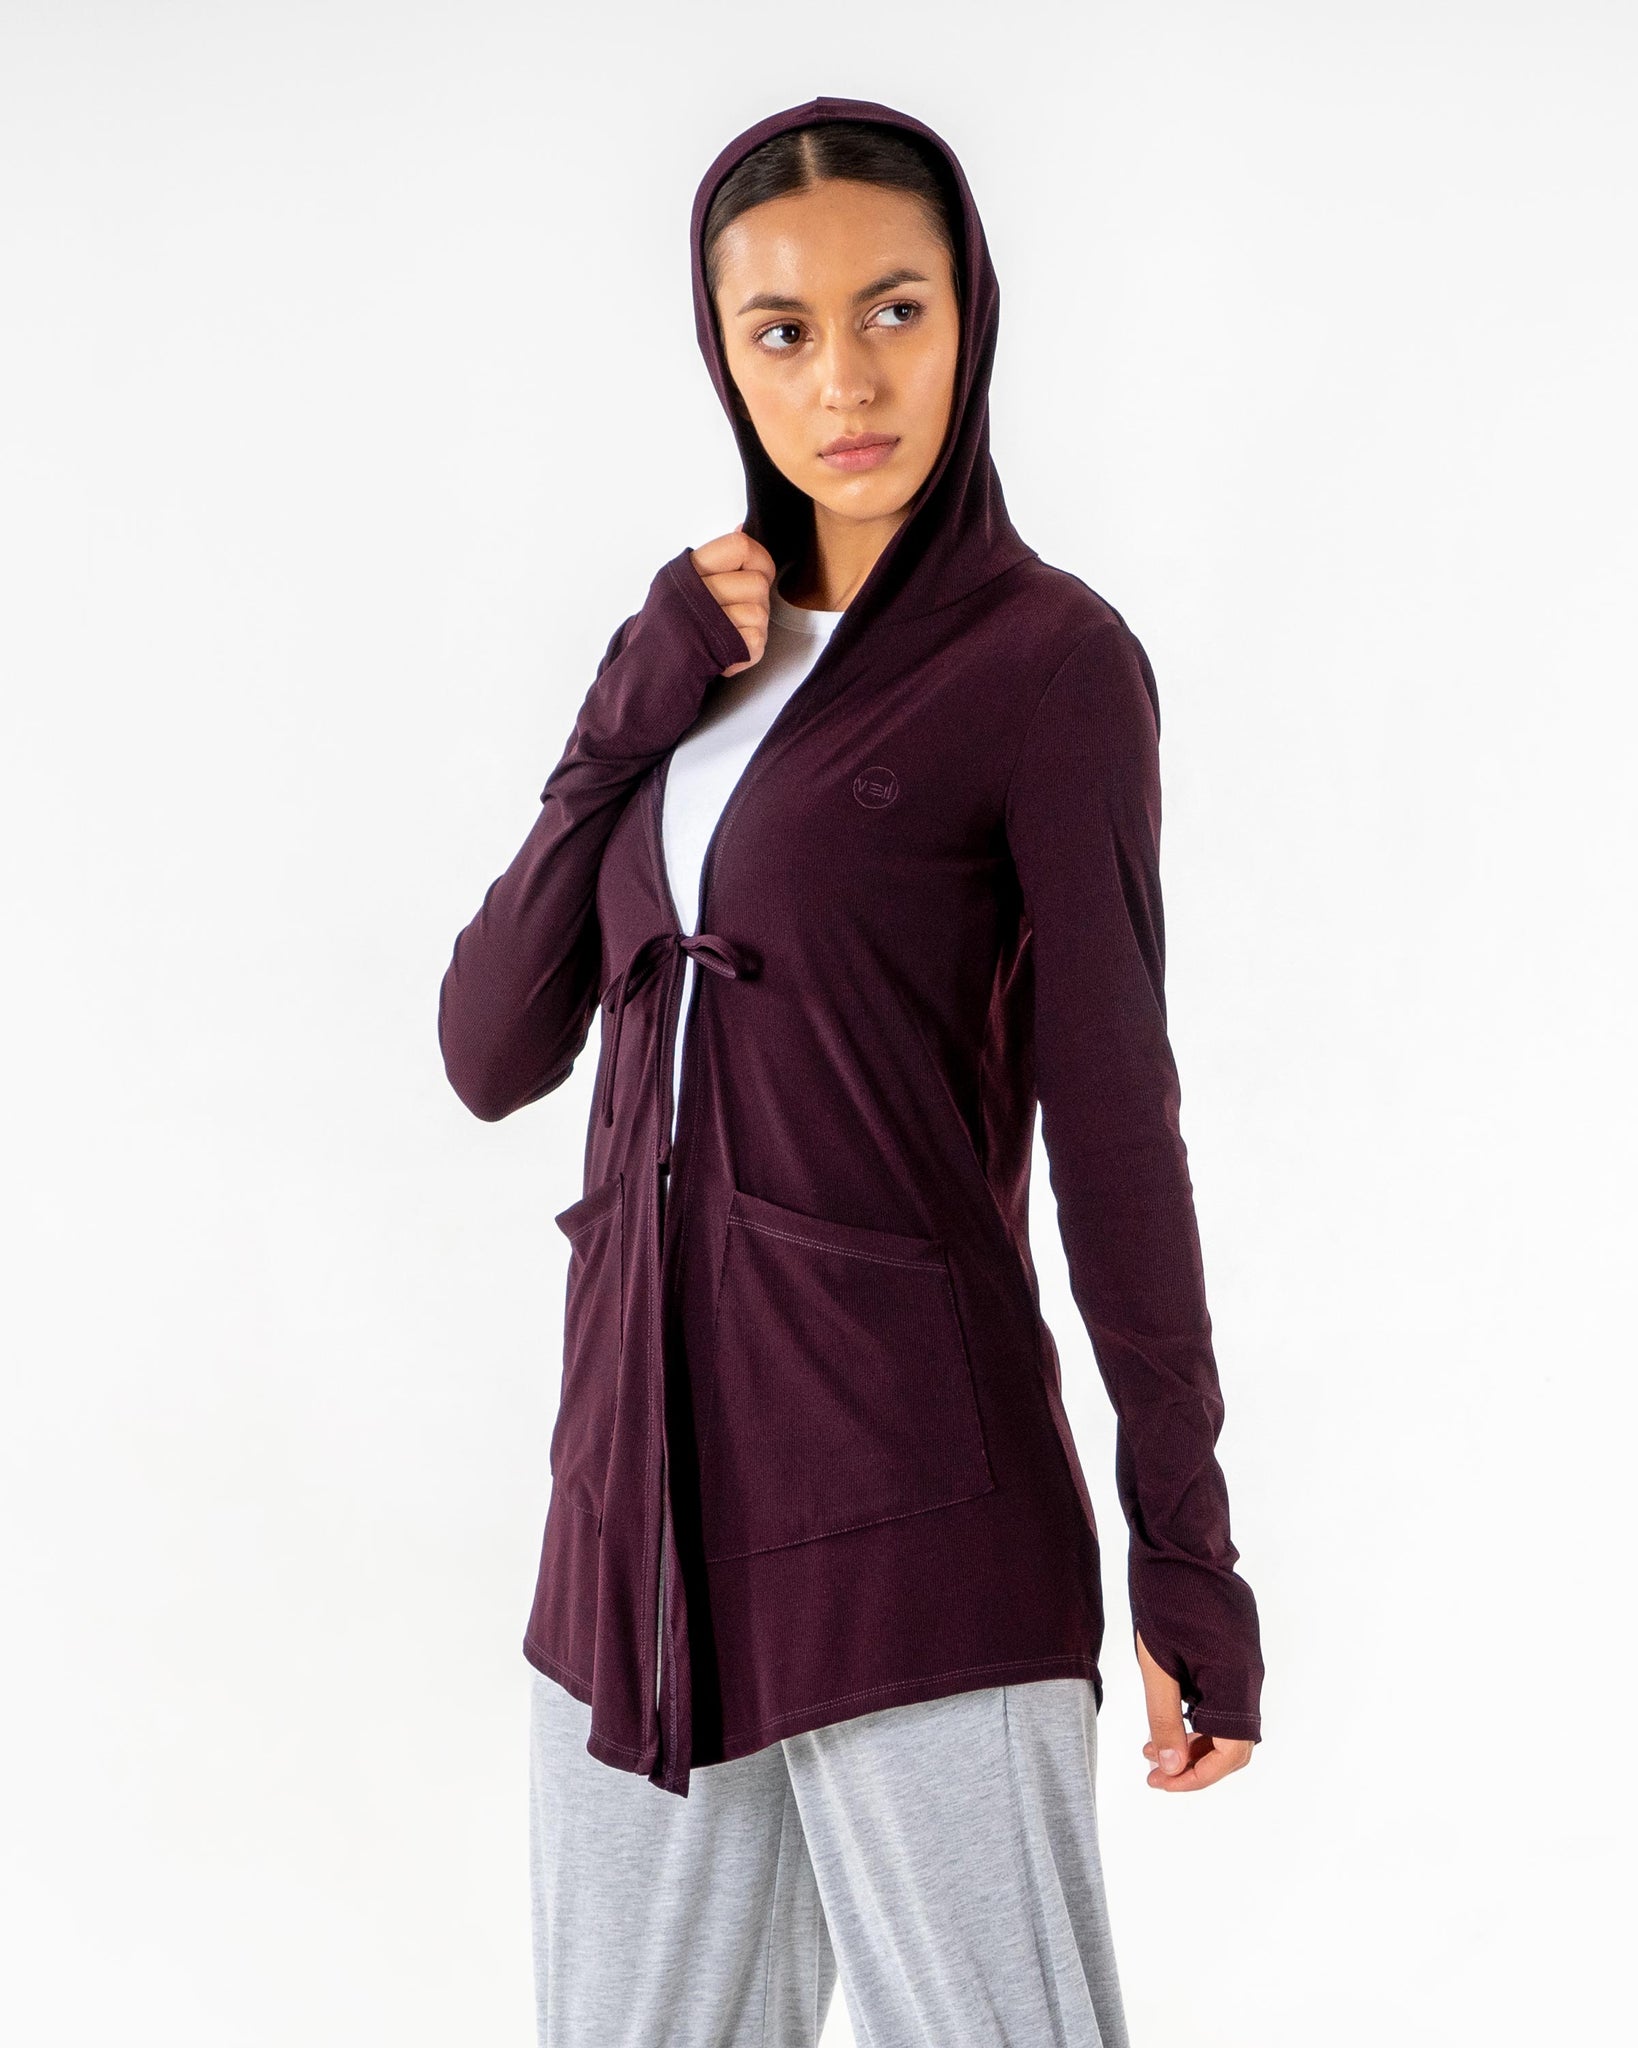 Move It Cardigan in burgundy by Veil Garments. Modest activewear collection.